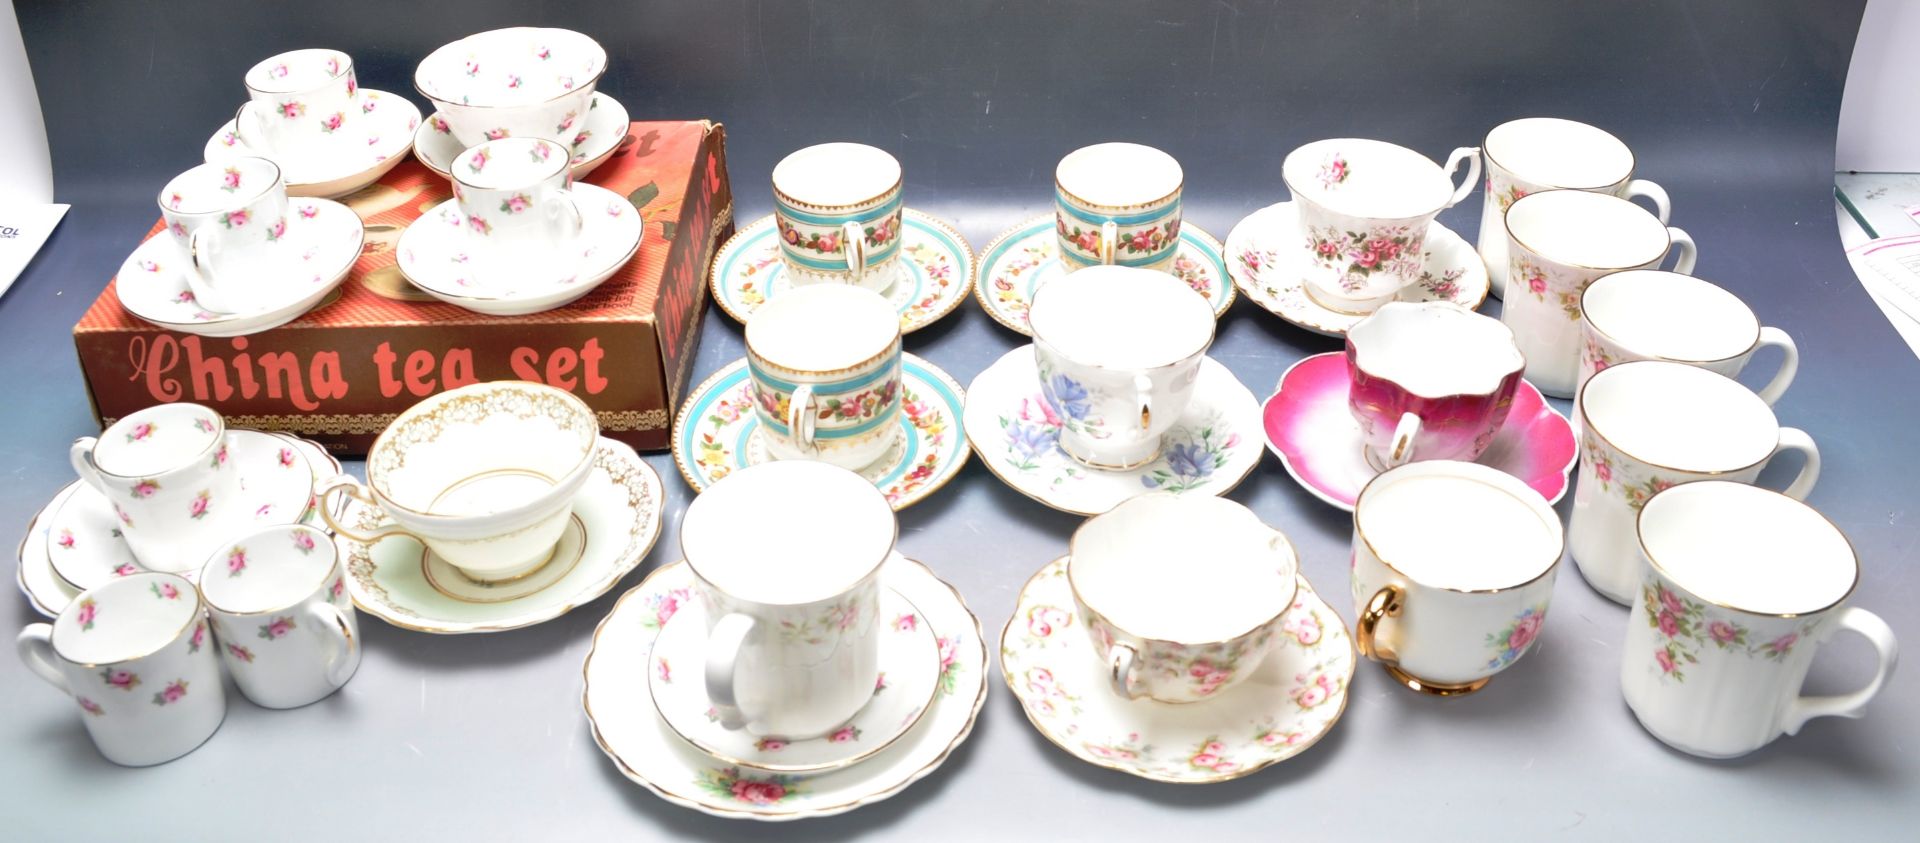 COLLECTION OF VINTAGE TEA CUPS AND SAUCERS. - Image 3 of 10